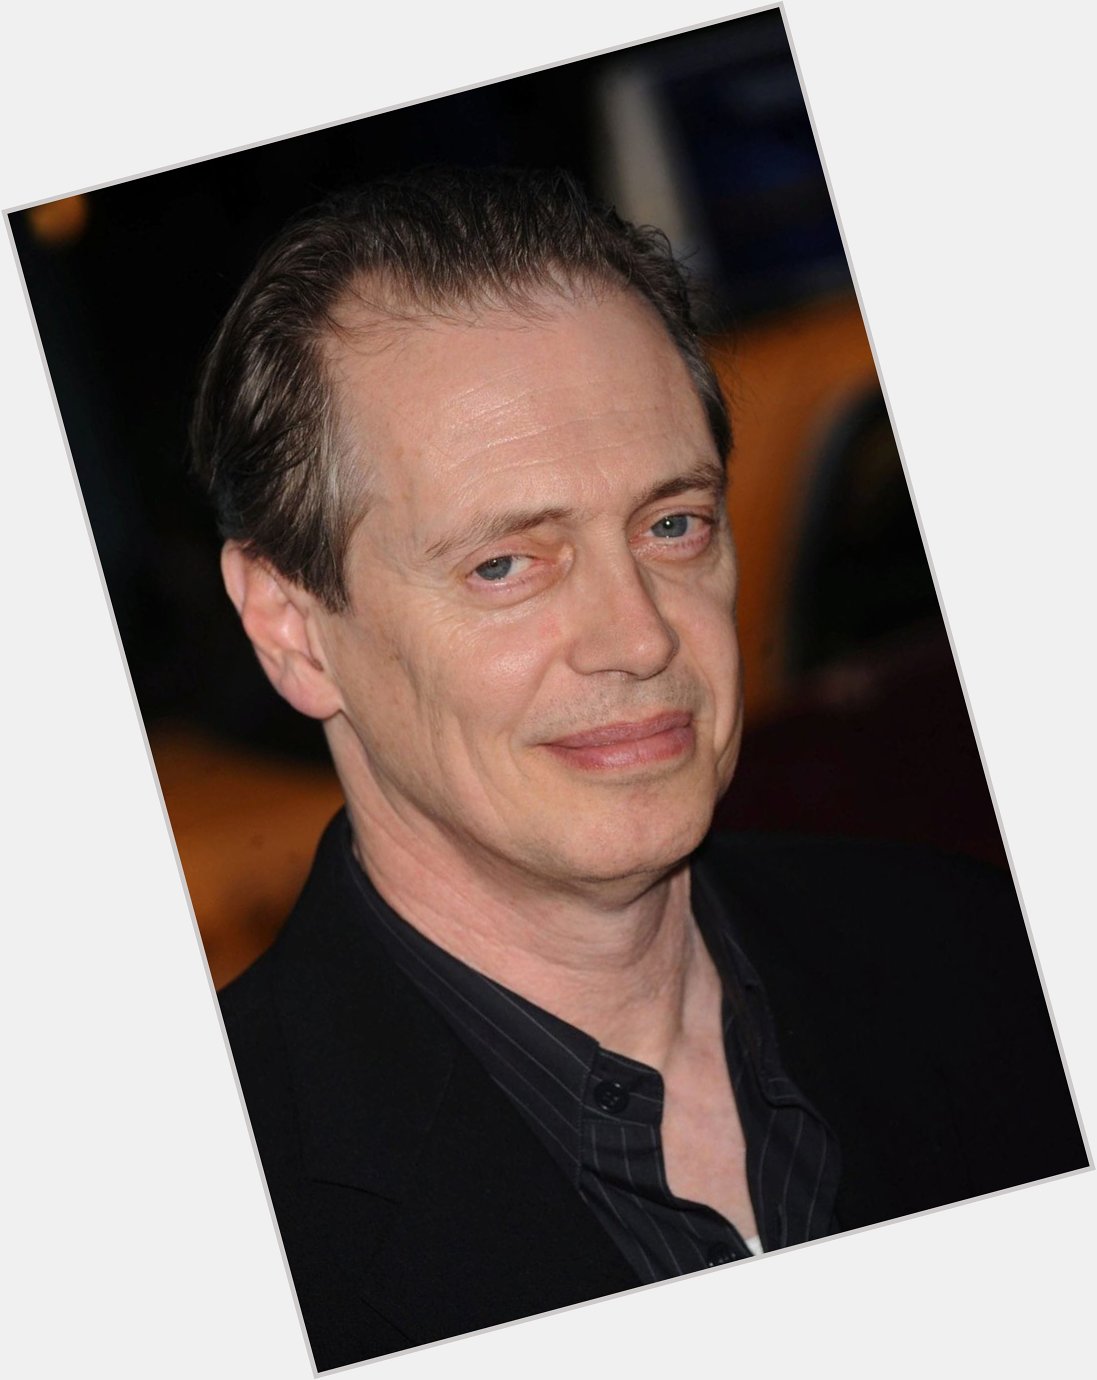 Happy Birthday to Steve Buscemi who turns 62 today! 